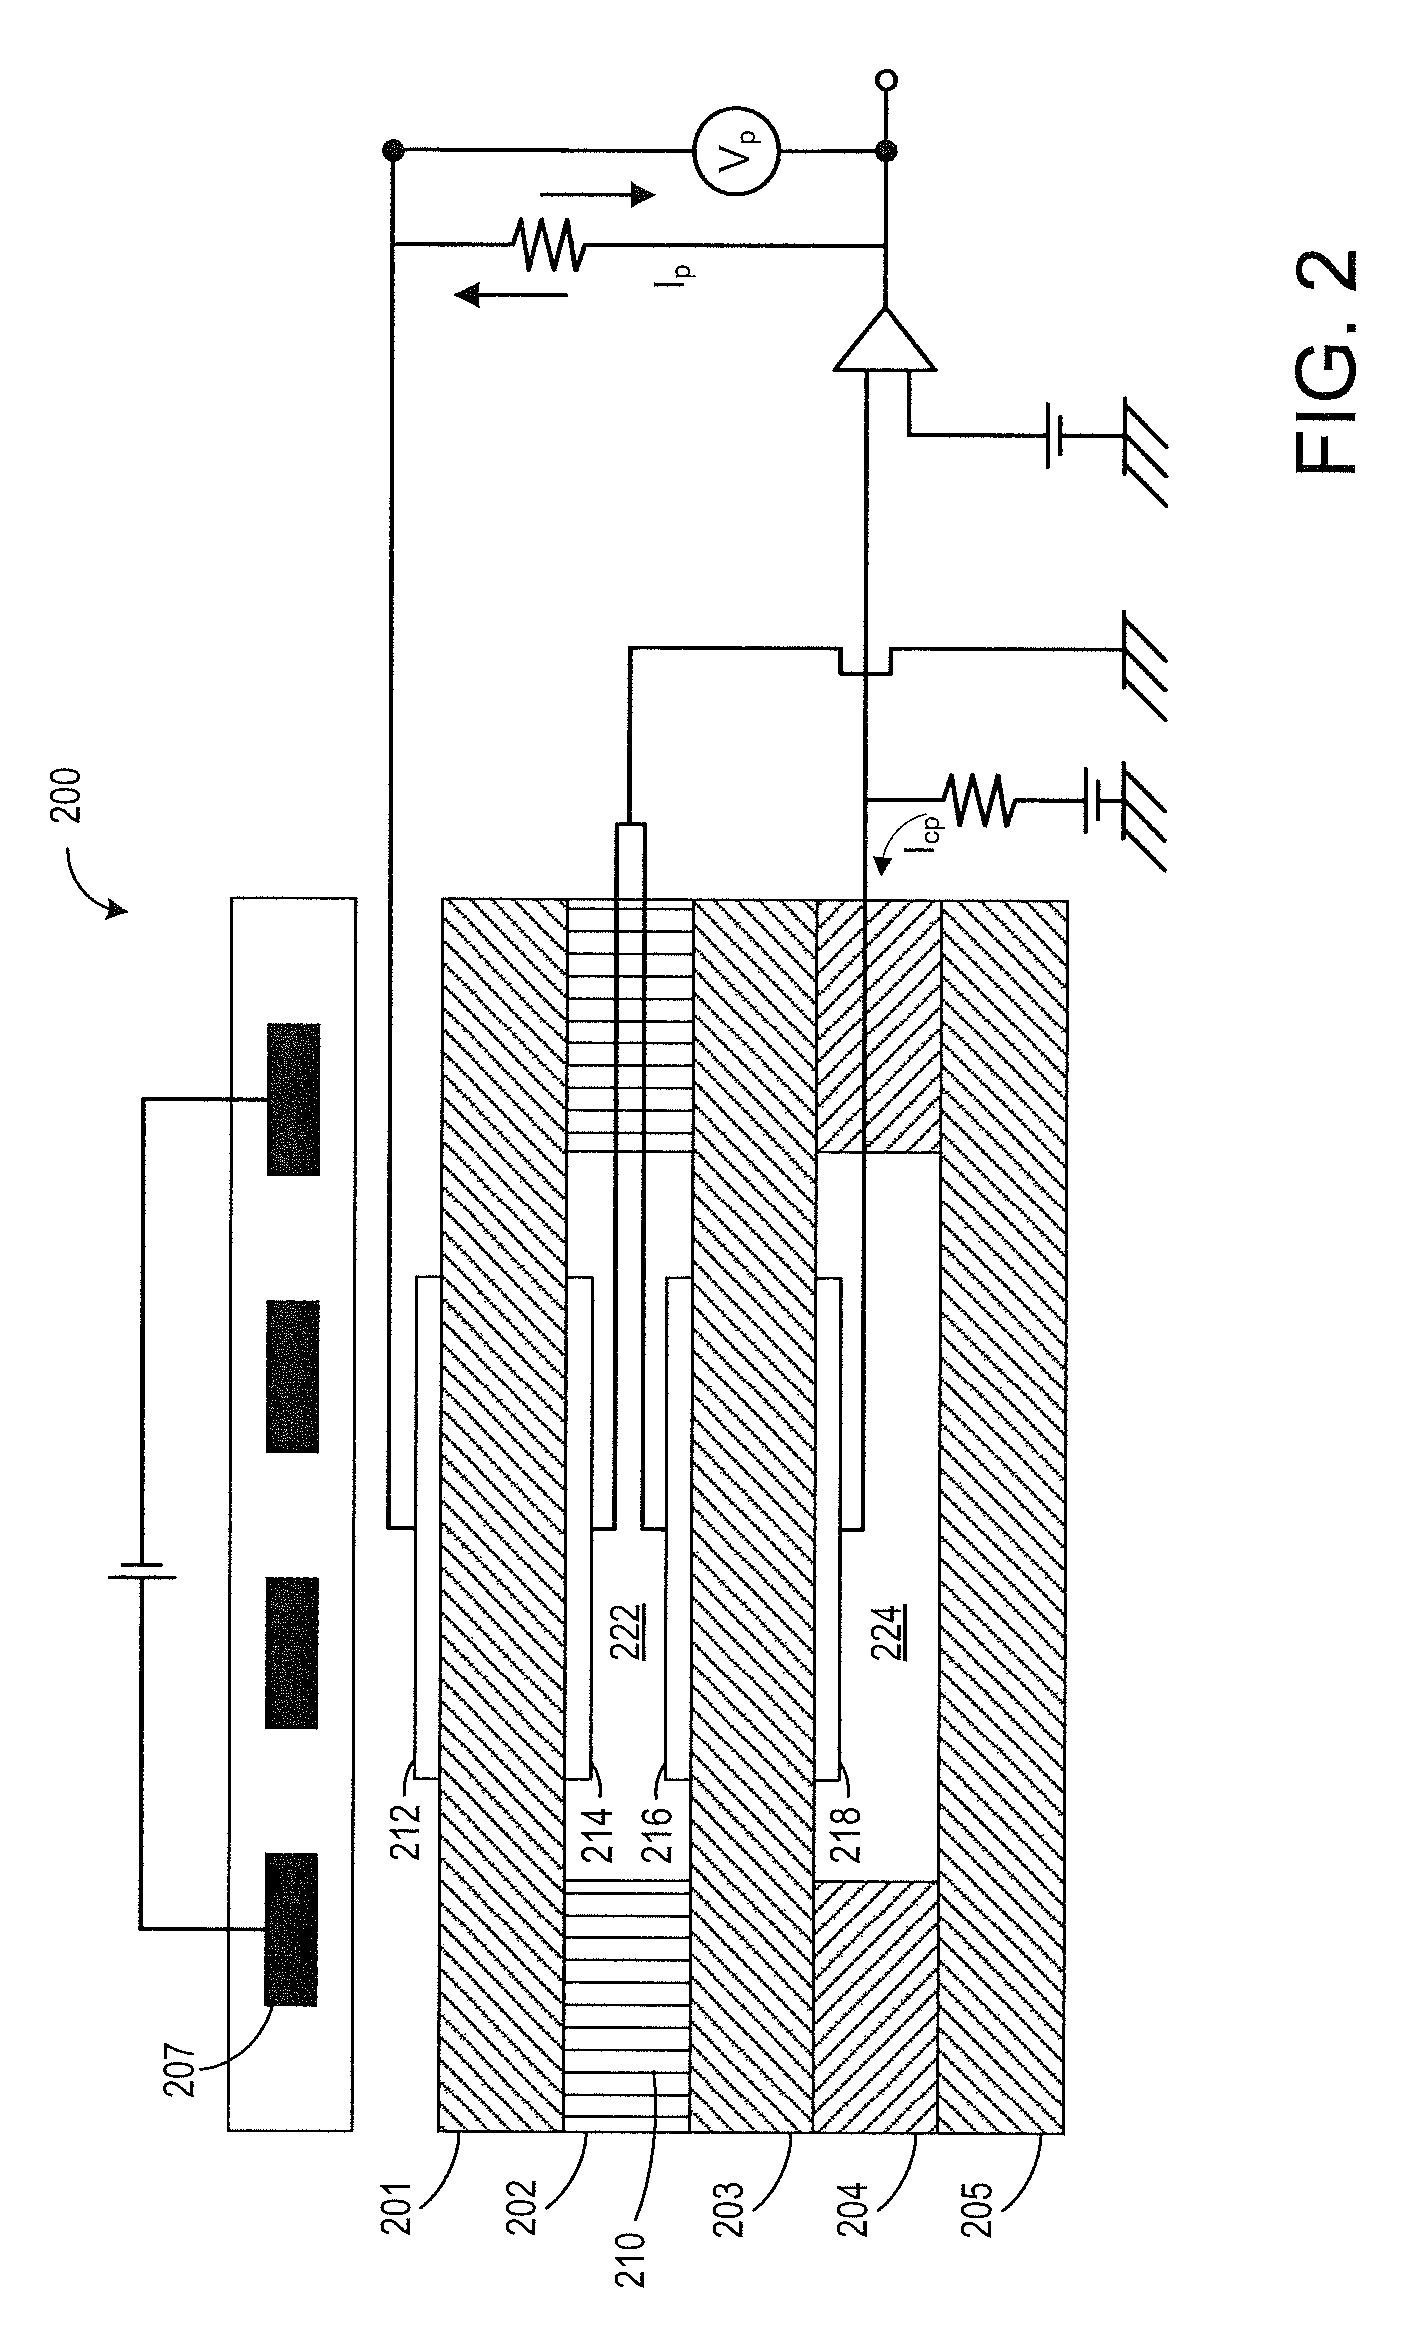 Methods and systems for humidity and PCV flow detection via an exhaust gas sensor